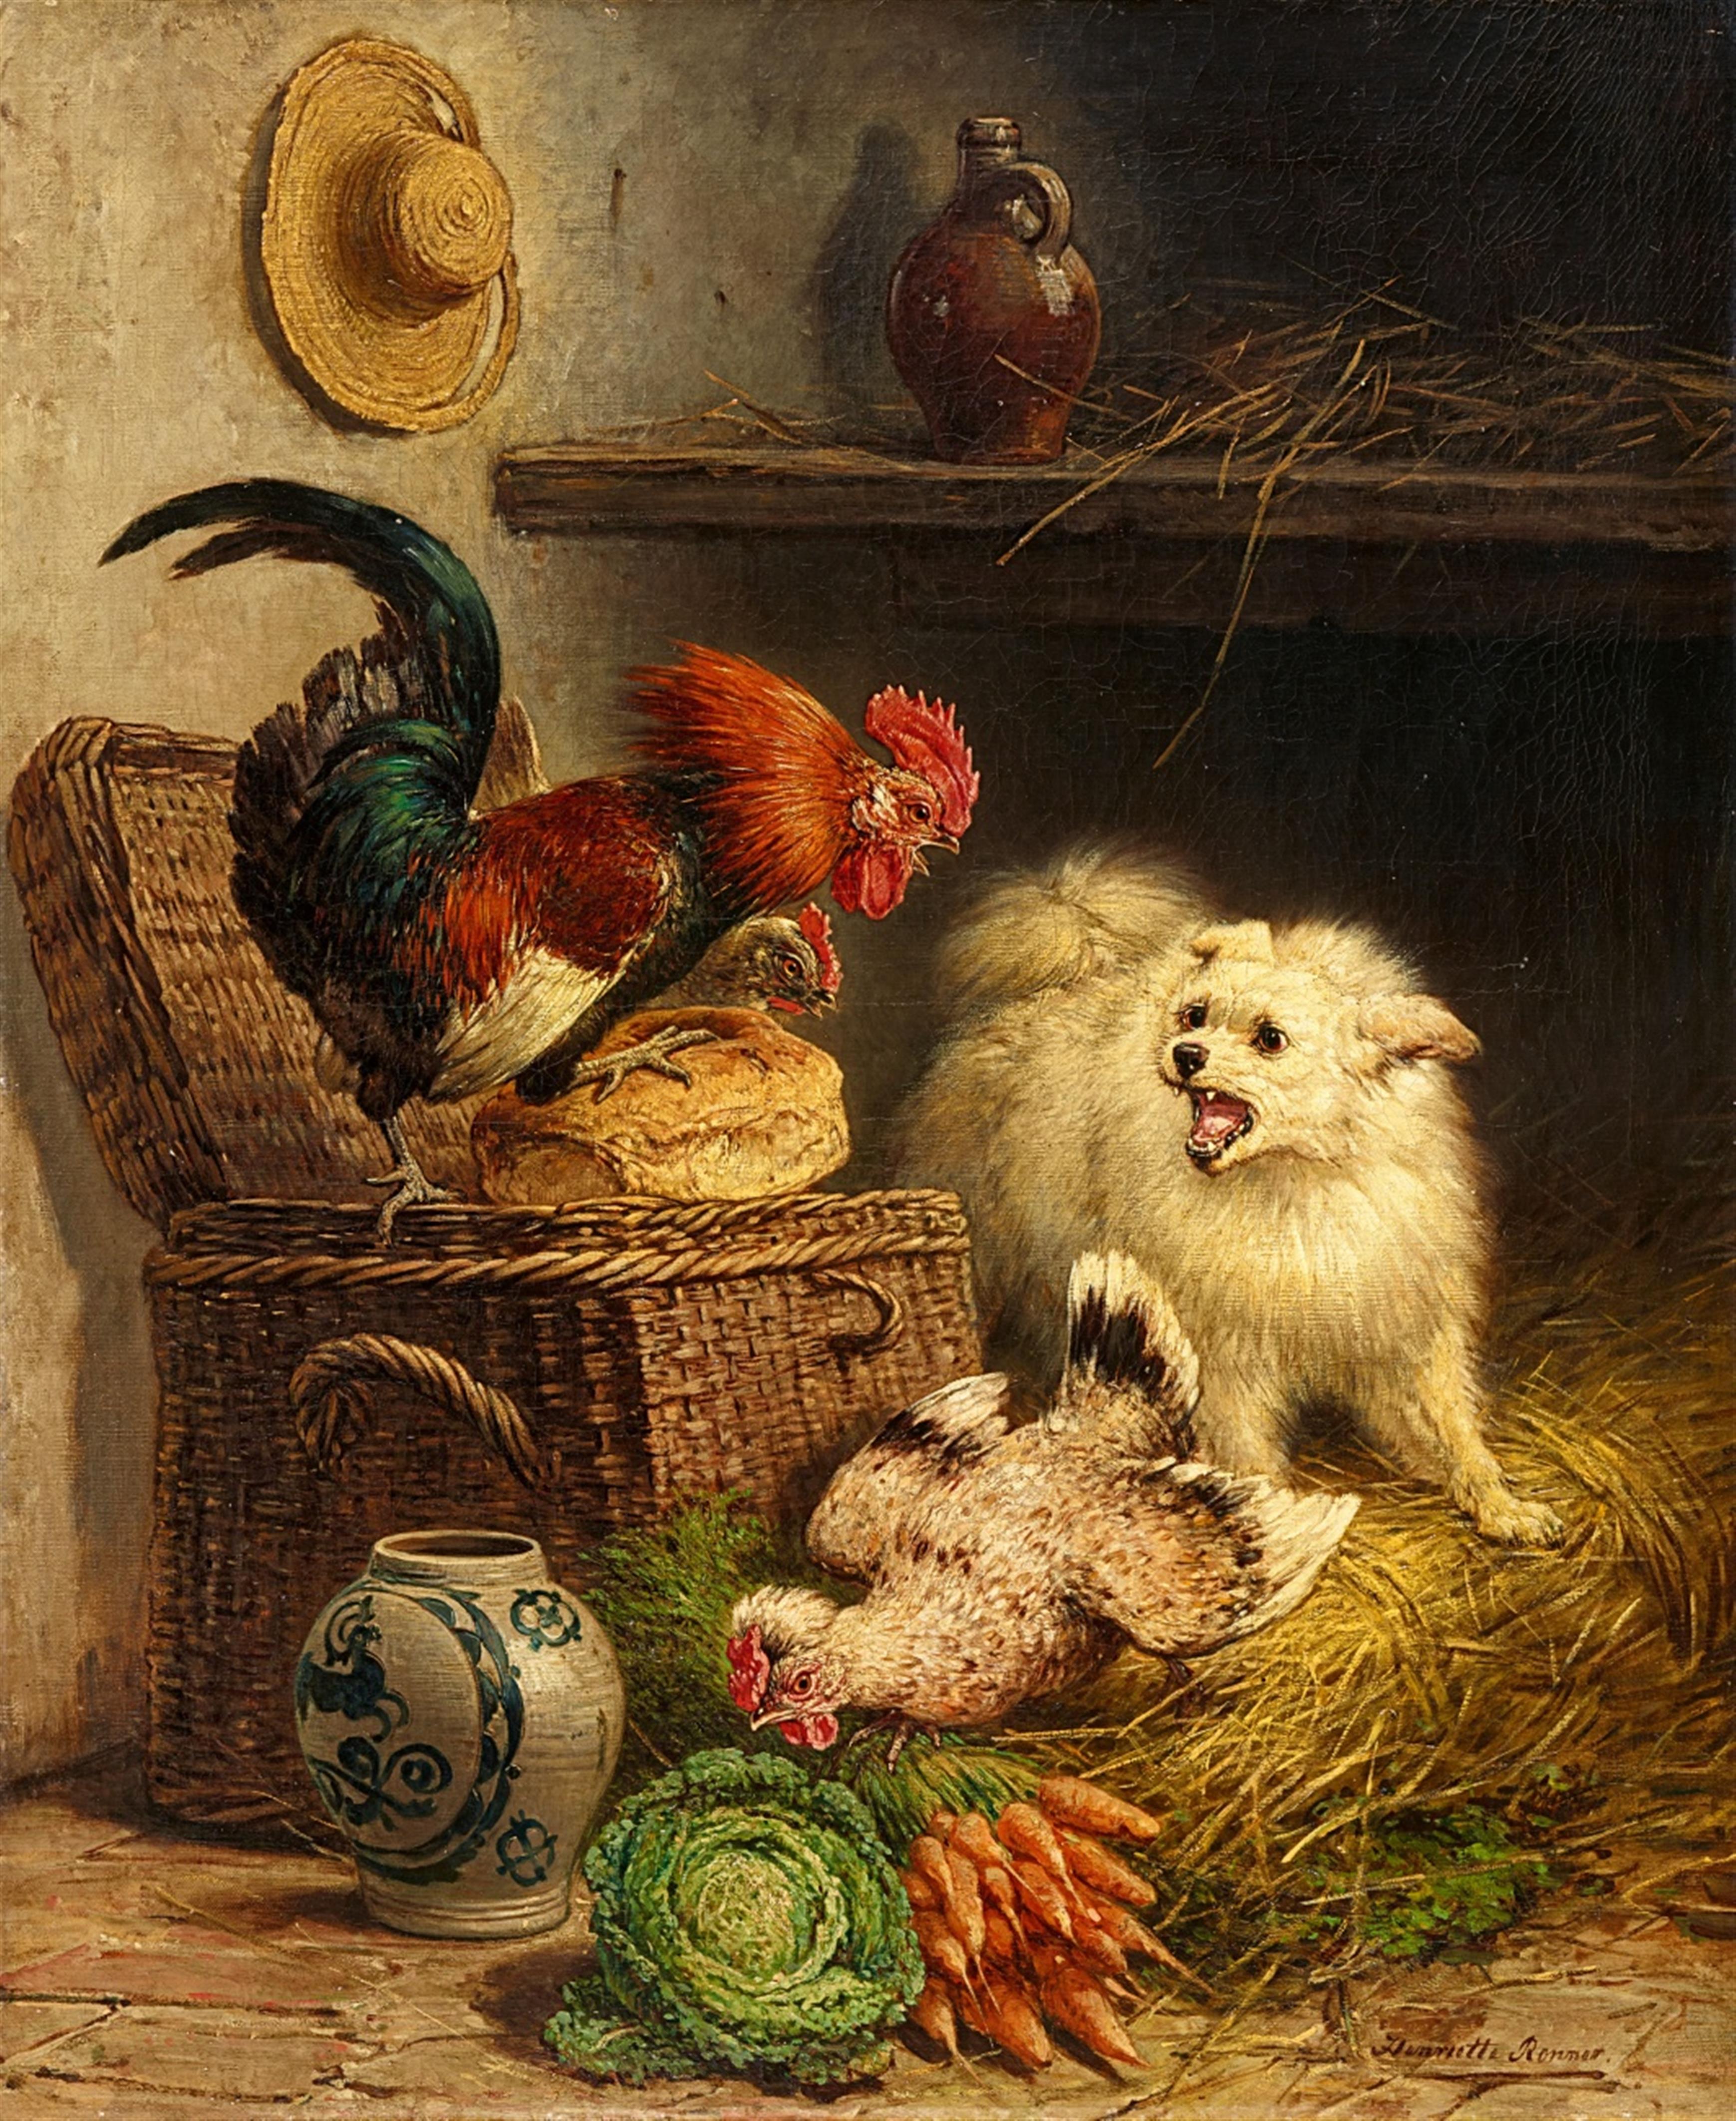 Henriette Ronner-Knip - Rooster and a Cat fighting over a Loaf of Bread - image-1